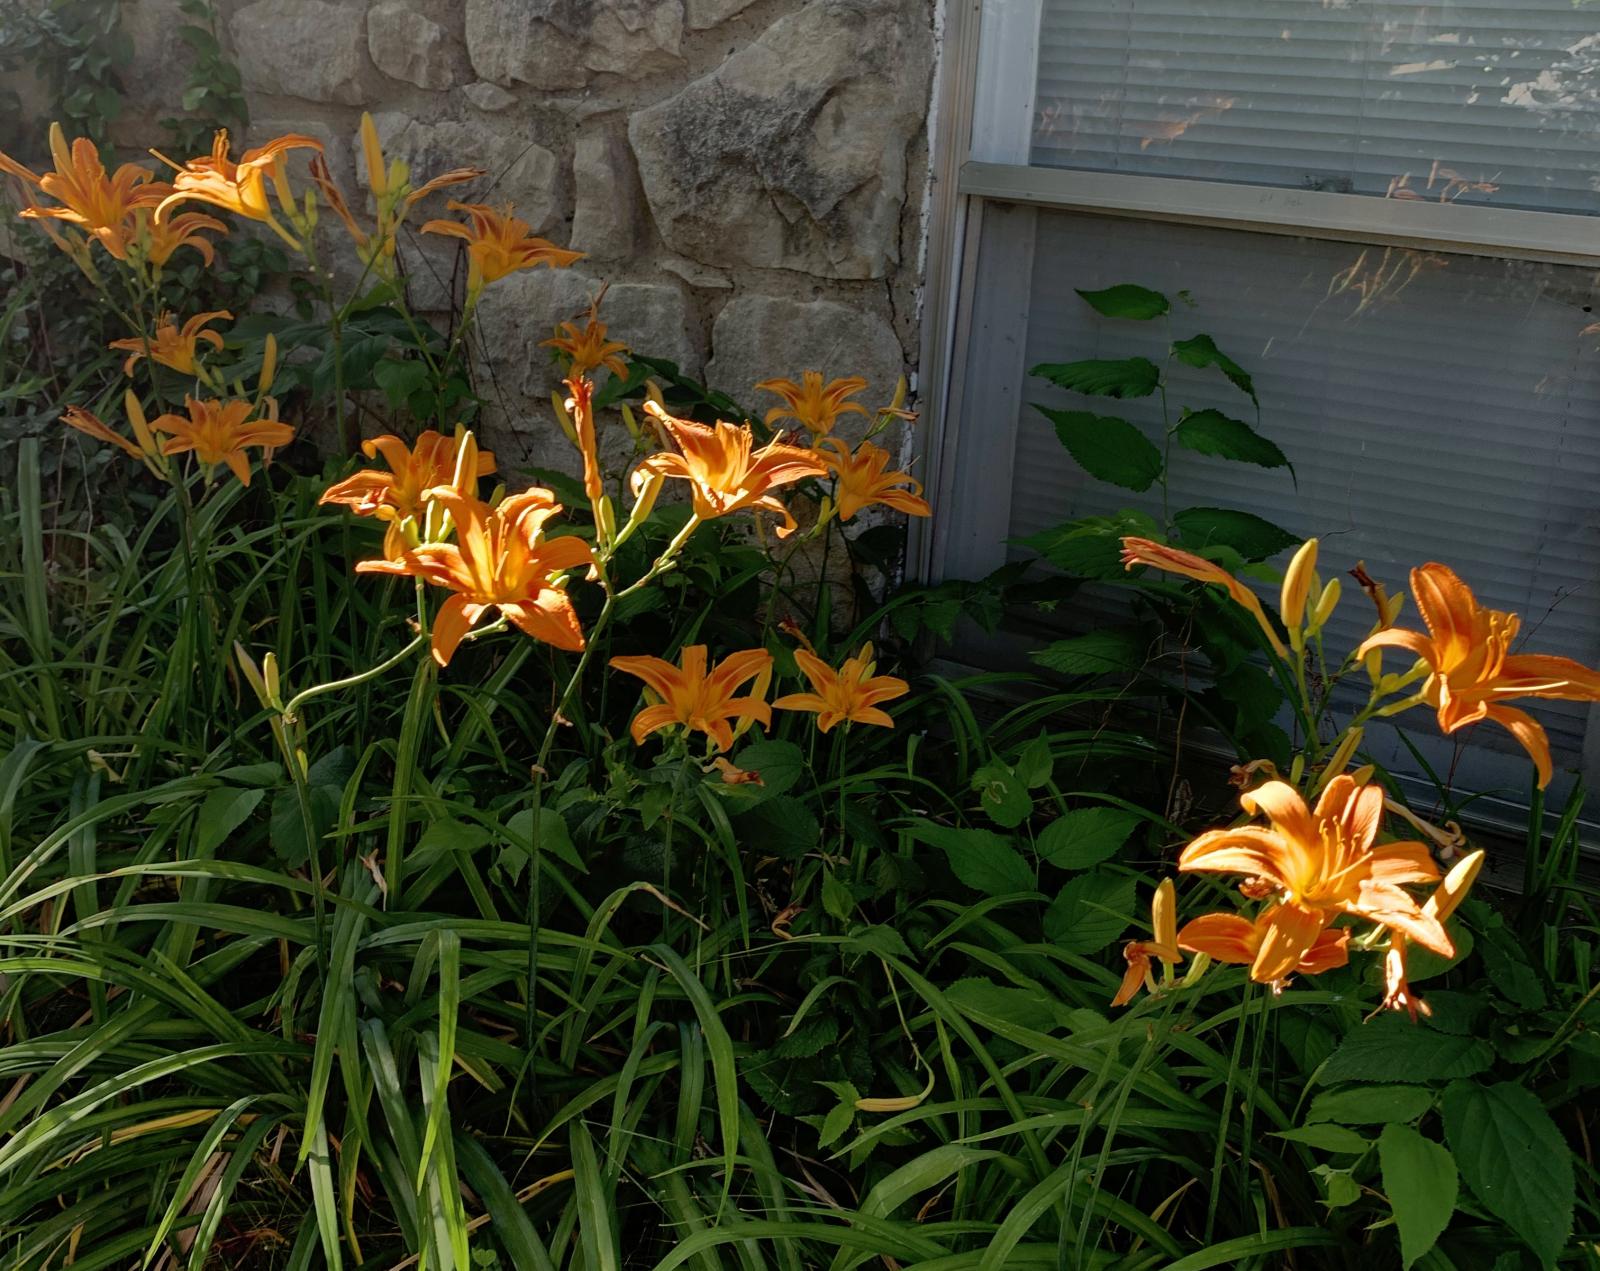 Lilies glow in the sunshine June 13, 2021, in Columbia, Mo. 